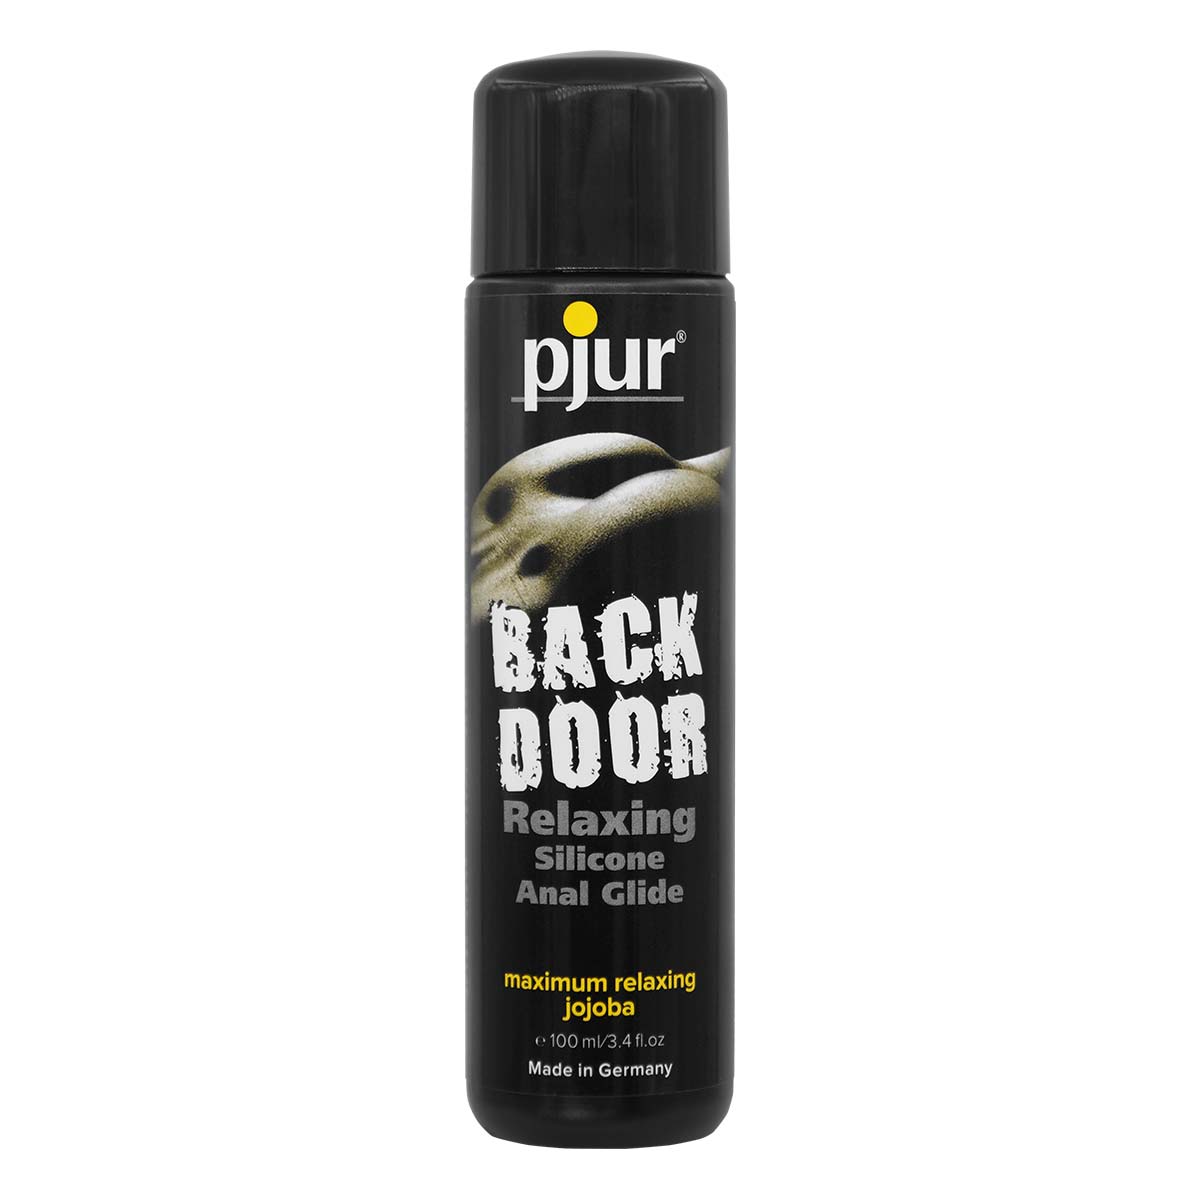 pjur BACK DOOR RELAXING Silicone Anal Glide 100ml Silicone-based Lubricant-thumb_2